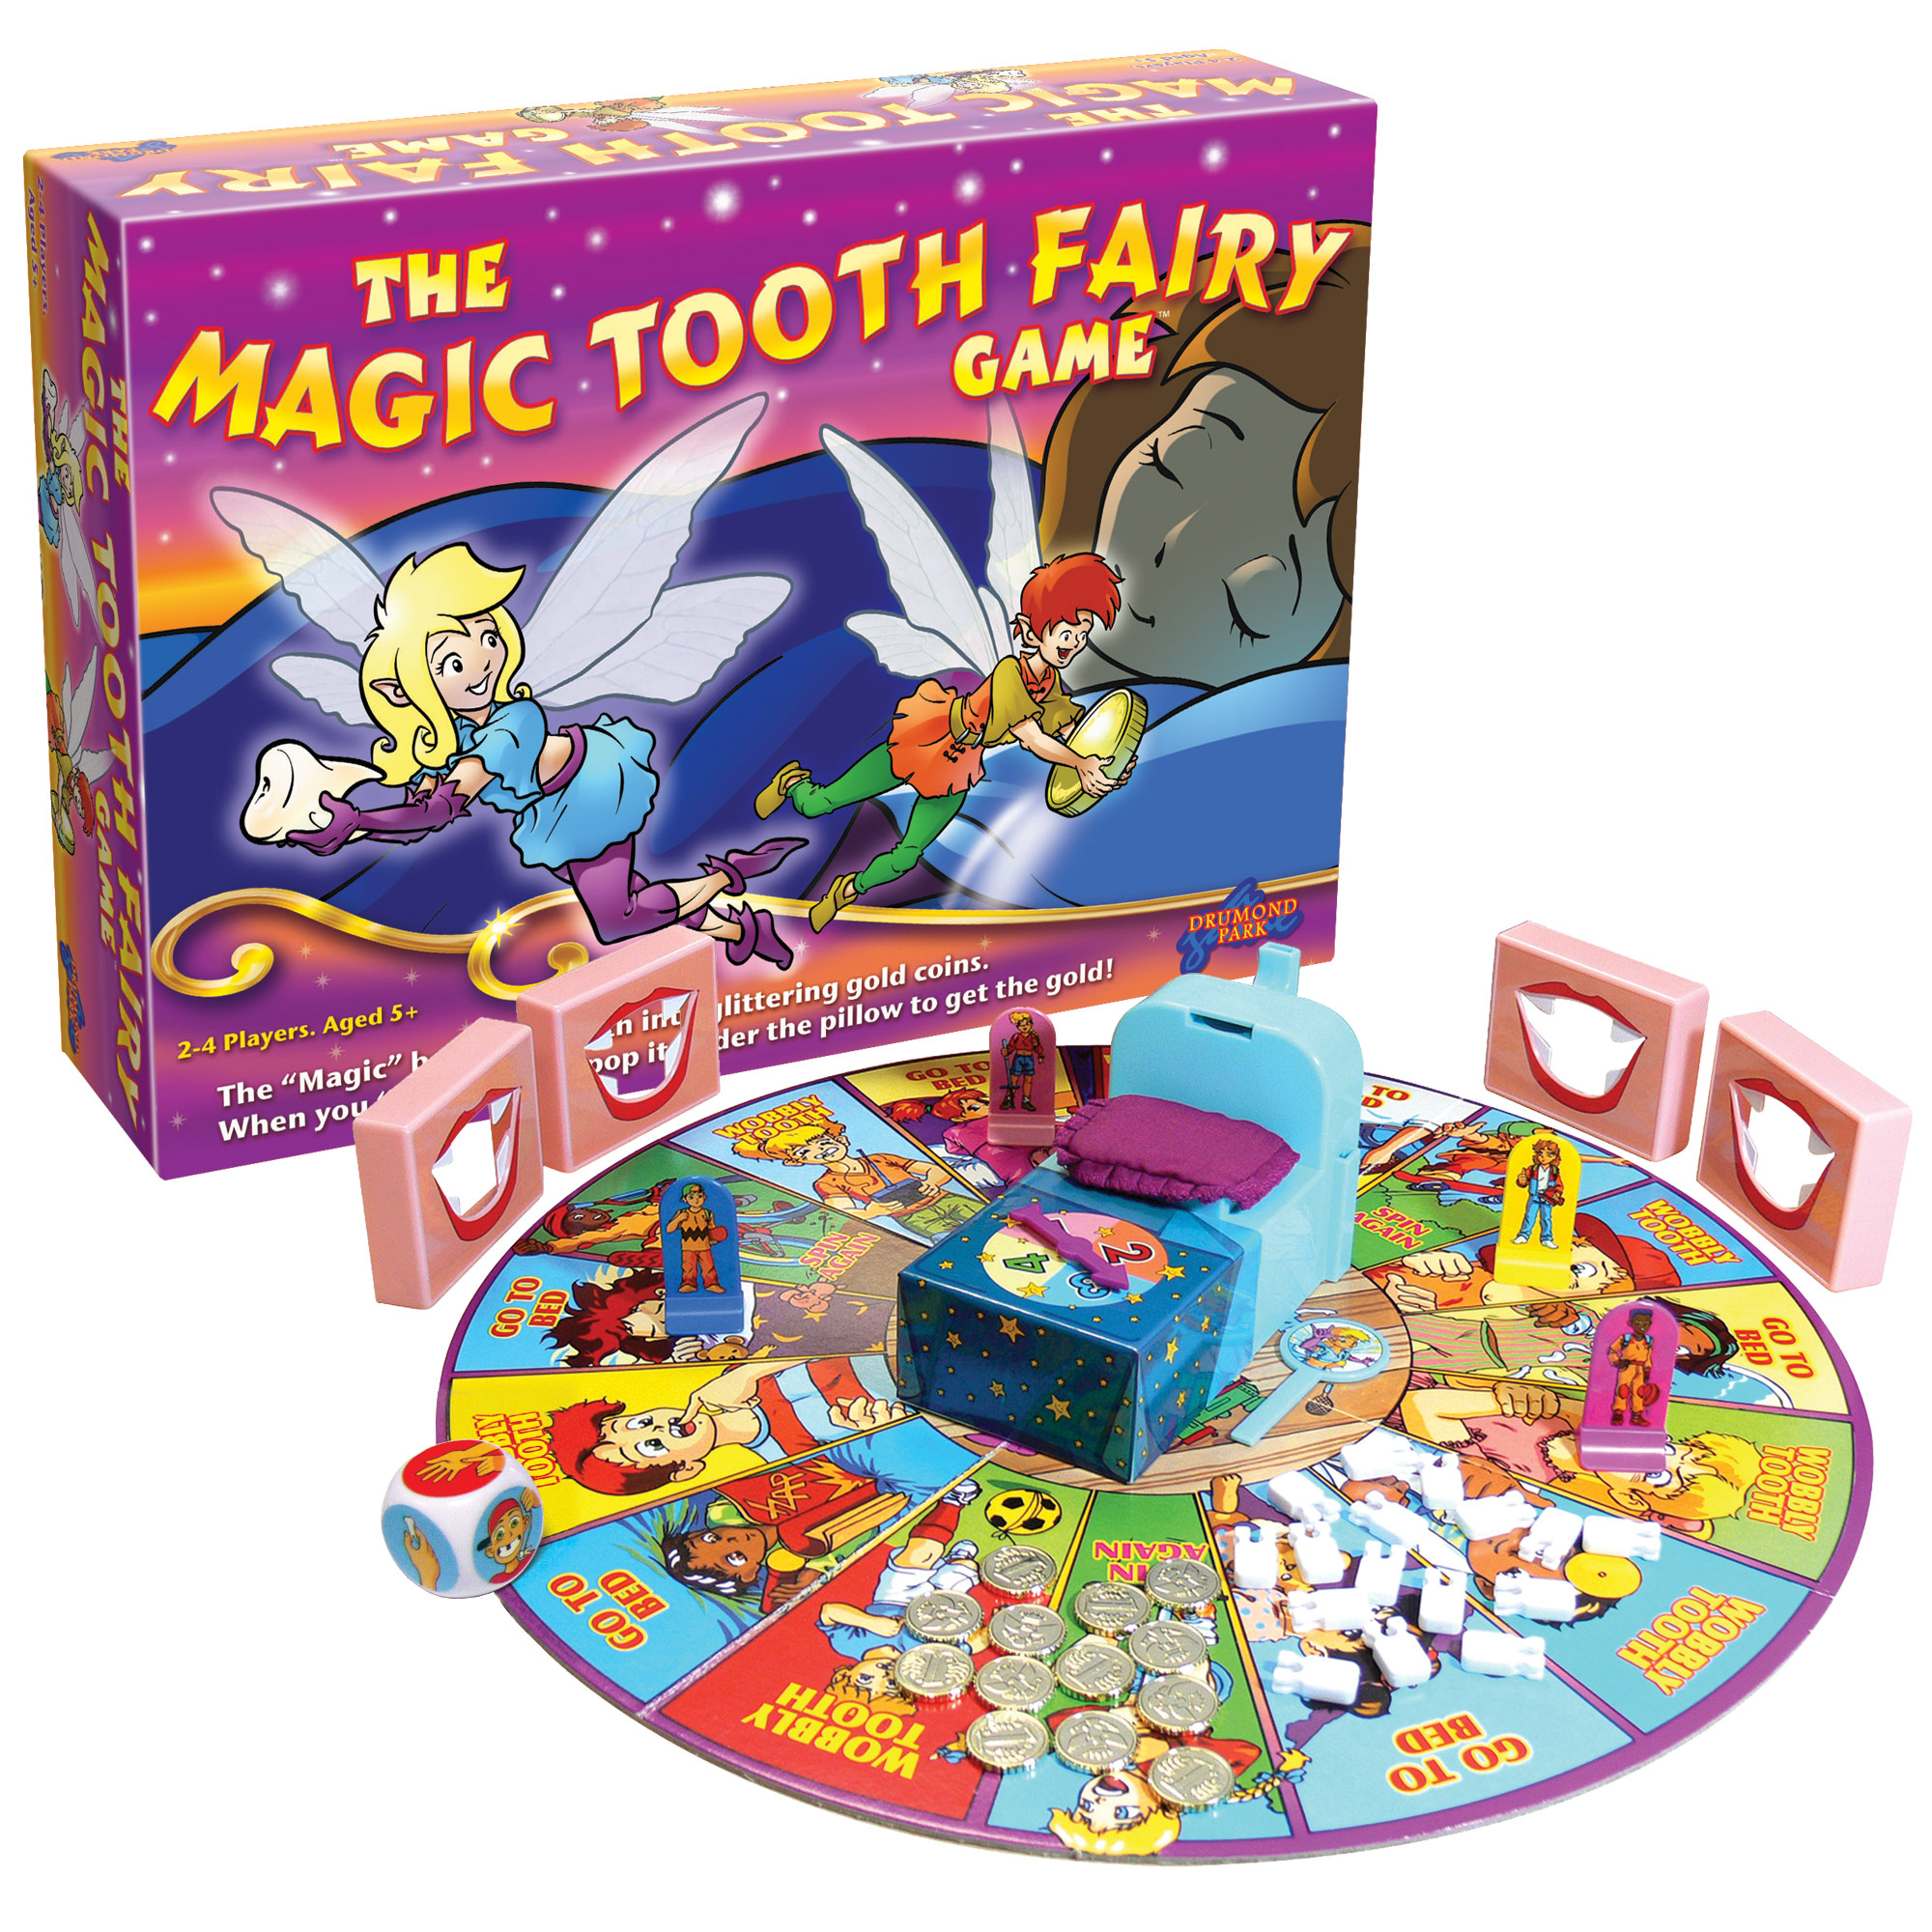 Magic Tooth Fairy from Drmond Park